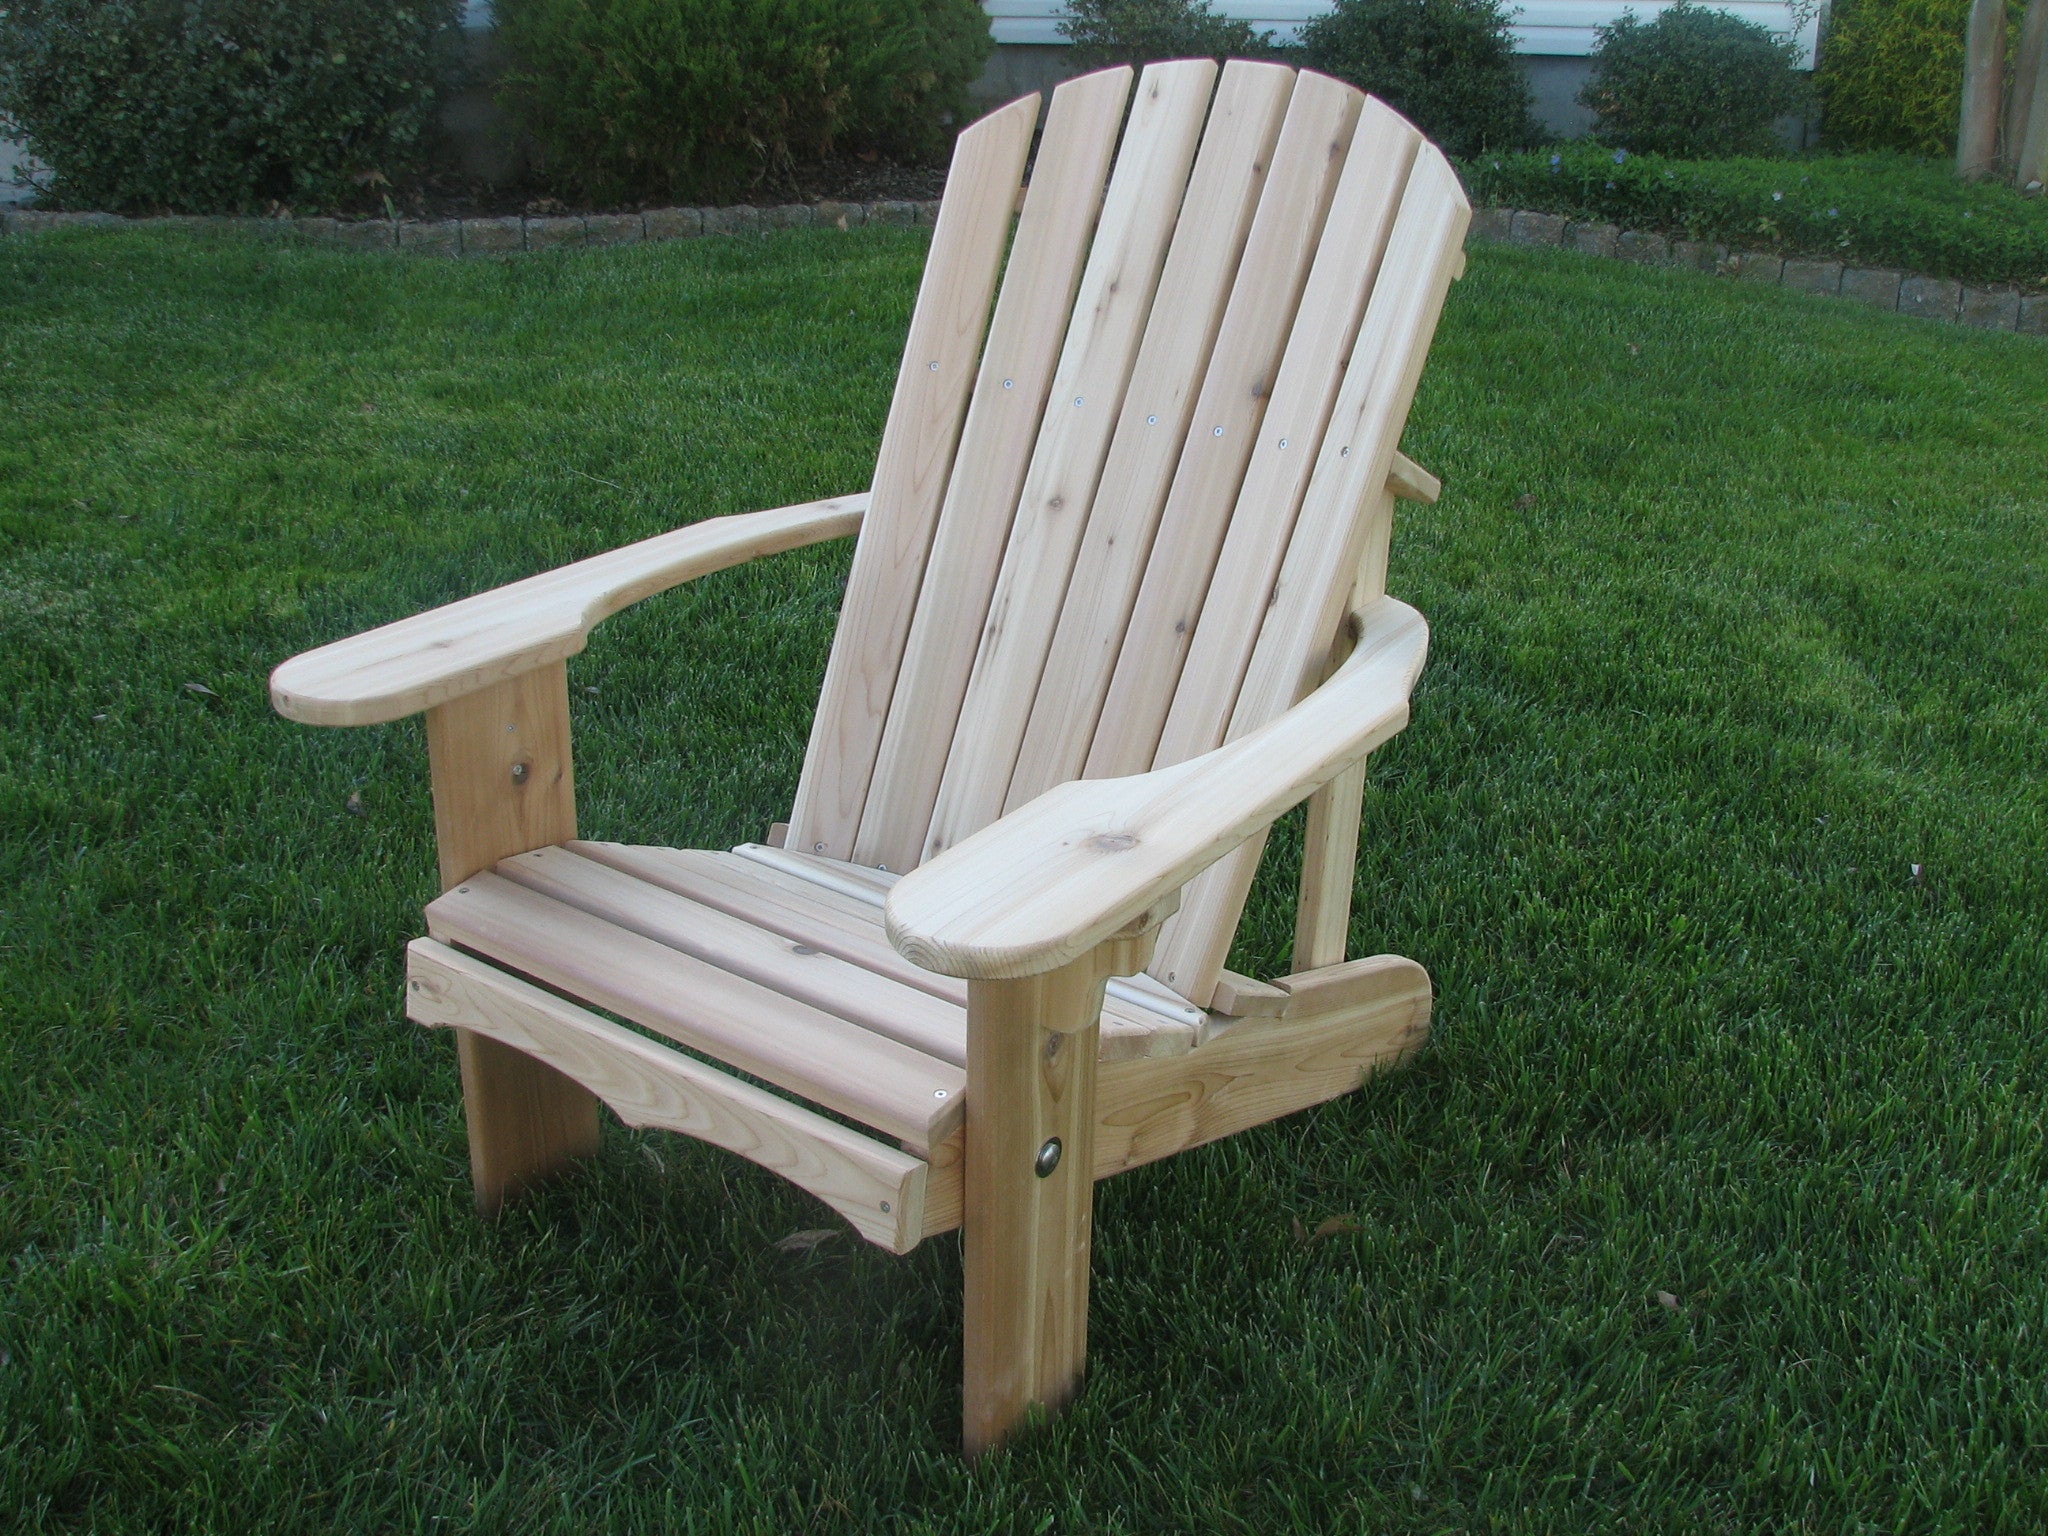 Are adirondack chairs comfortable